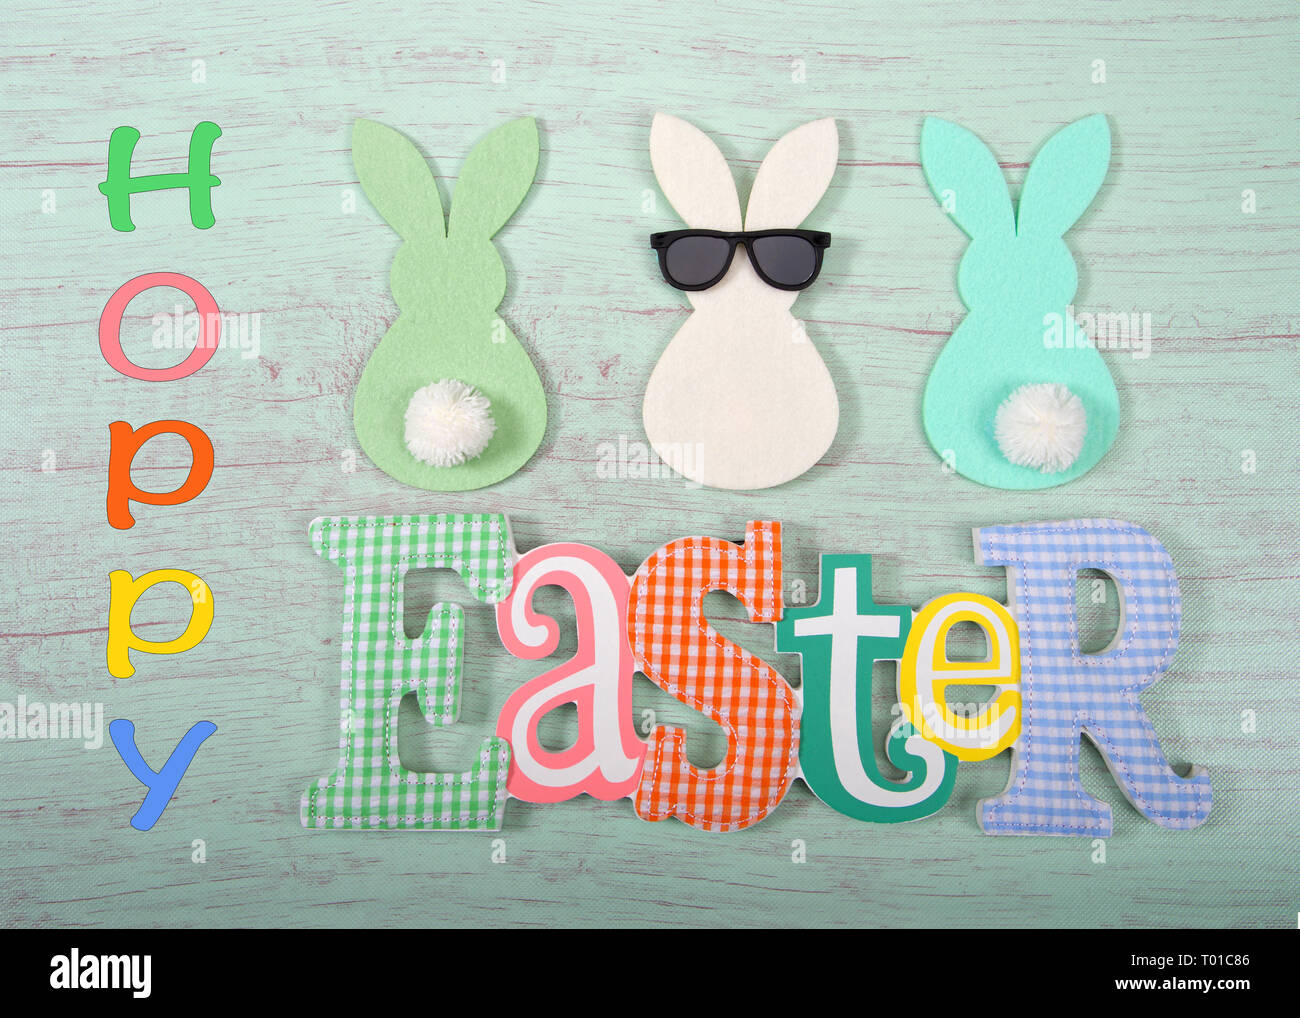 Felt bunnies in earth tone colors in a row, middle bunny wearing fun sunglasses other bunnies bottoms forward. Easter sign below. Hoppy Easter theme. Stock Photo